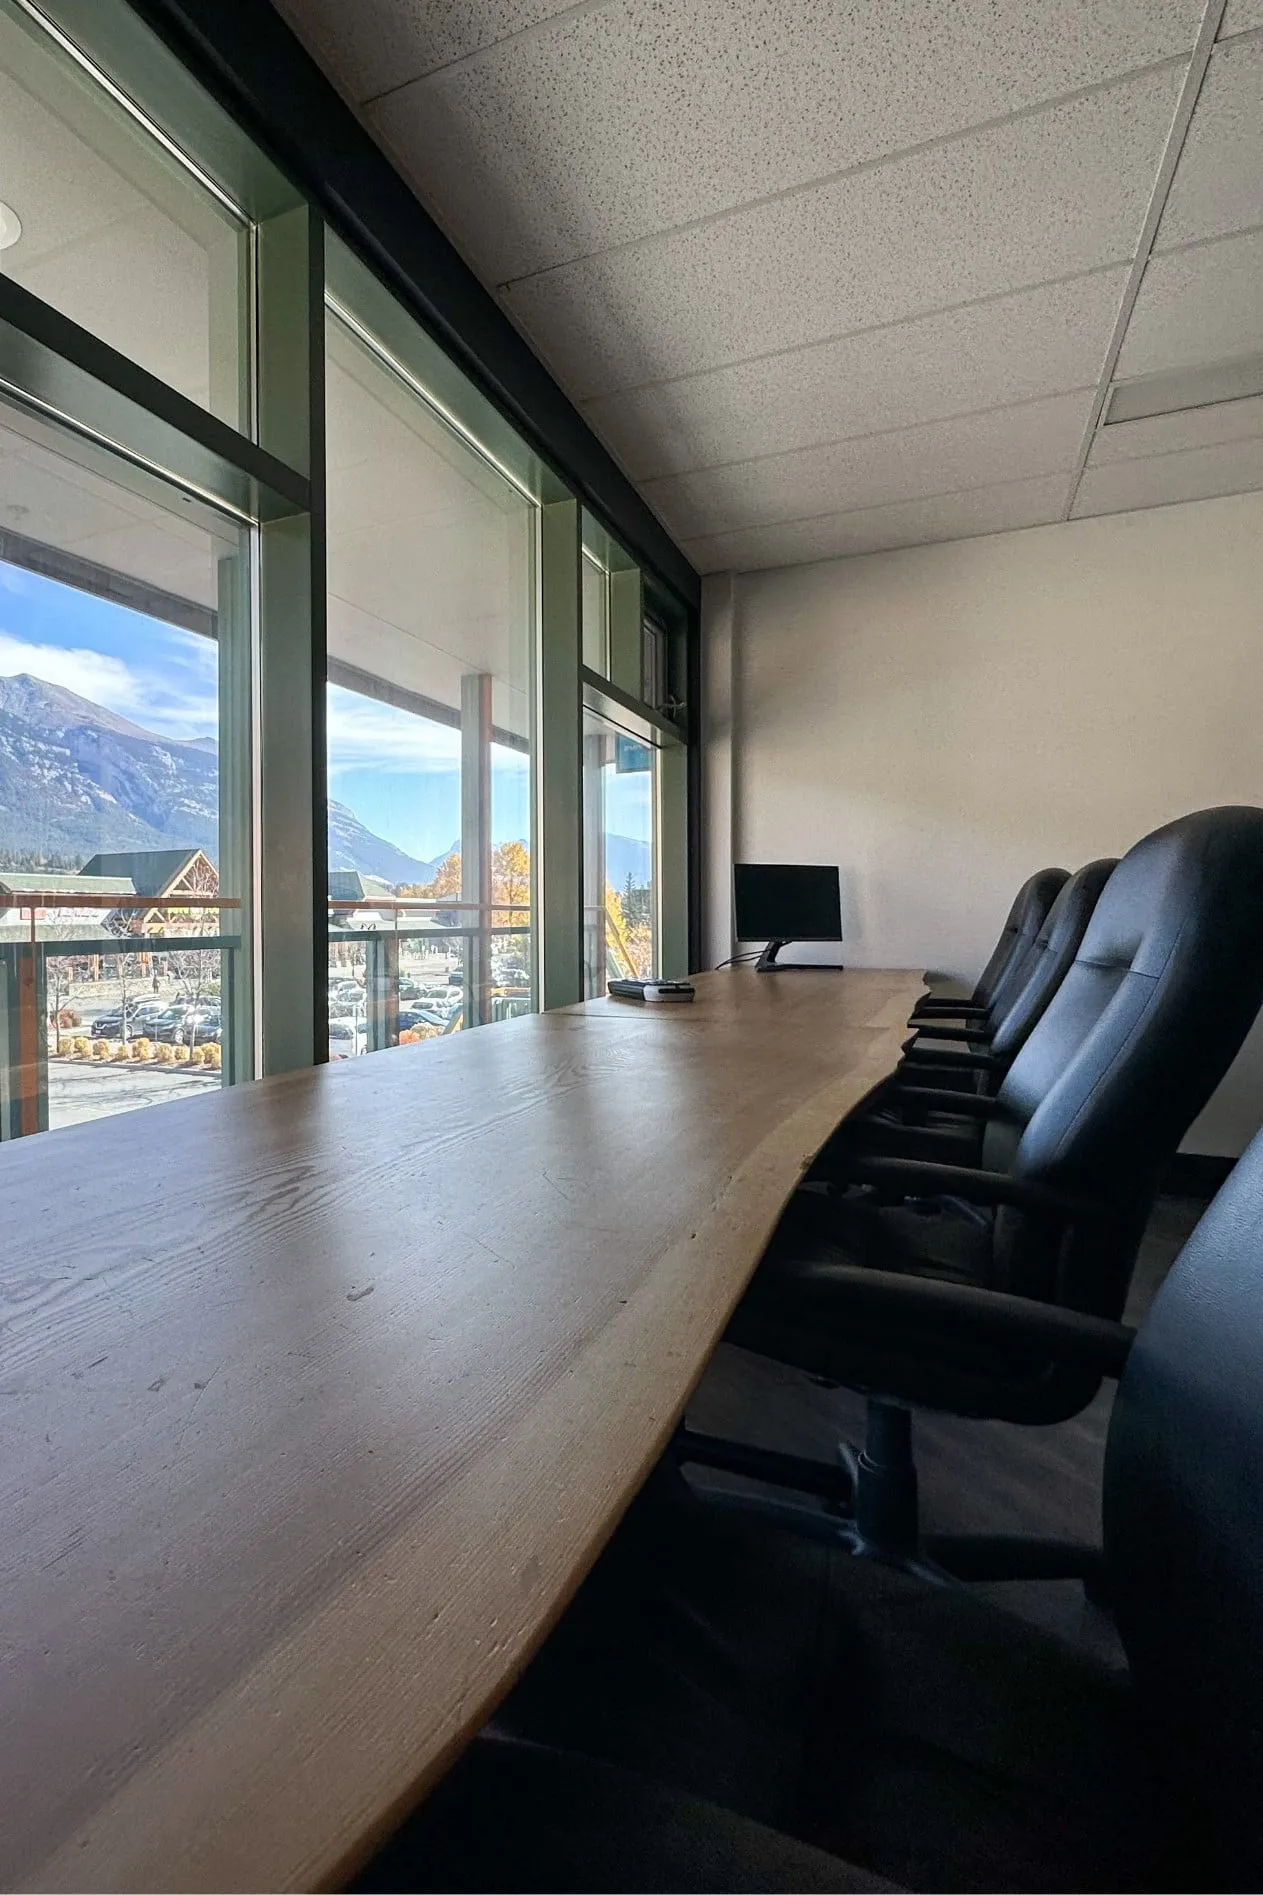 e=mc2 - Conference table with a view of the mountains